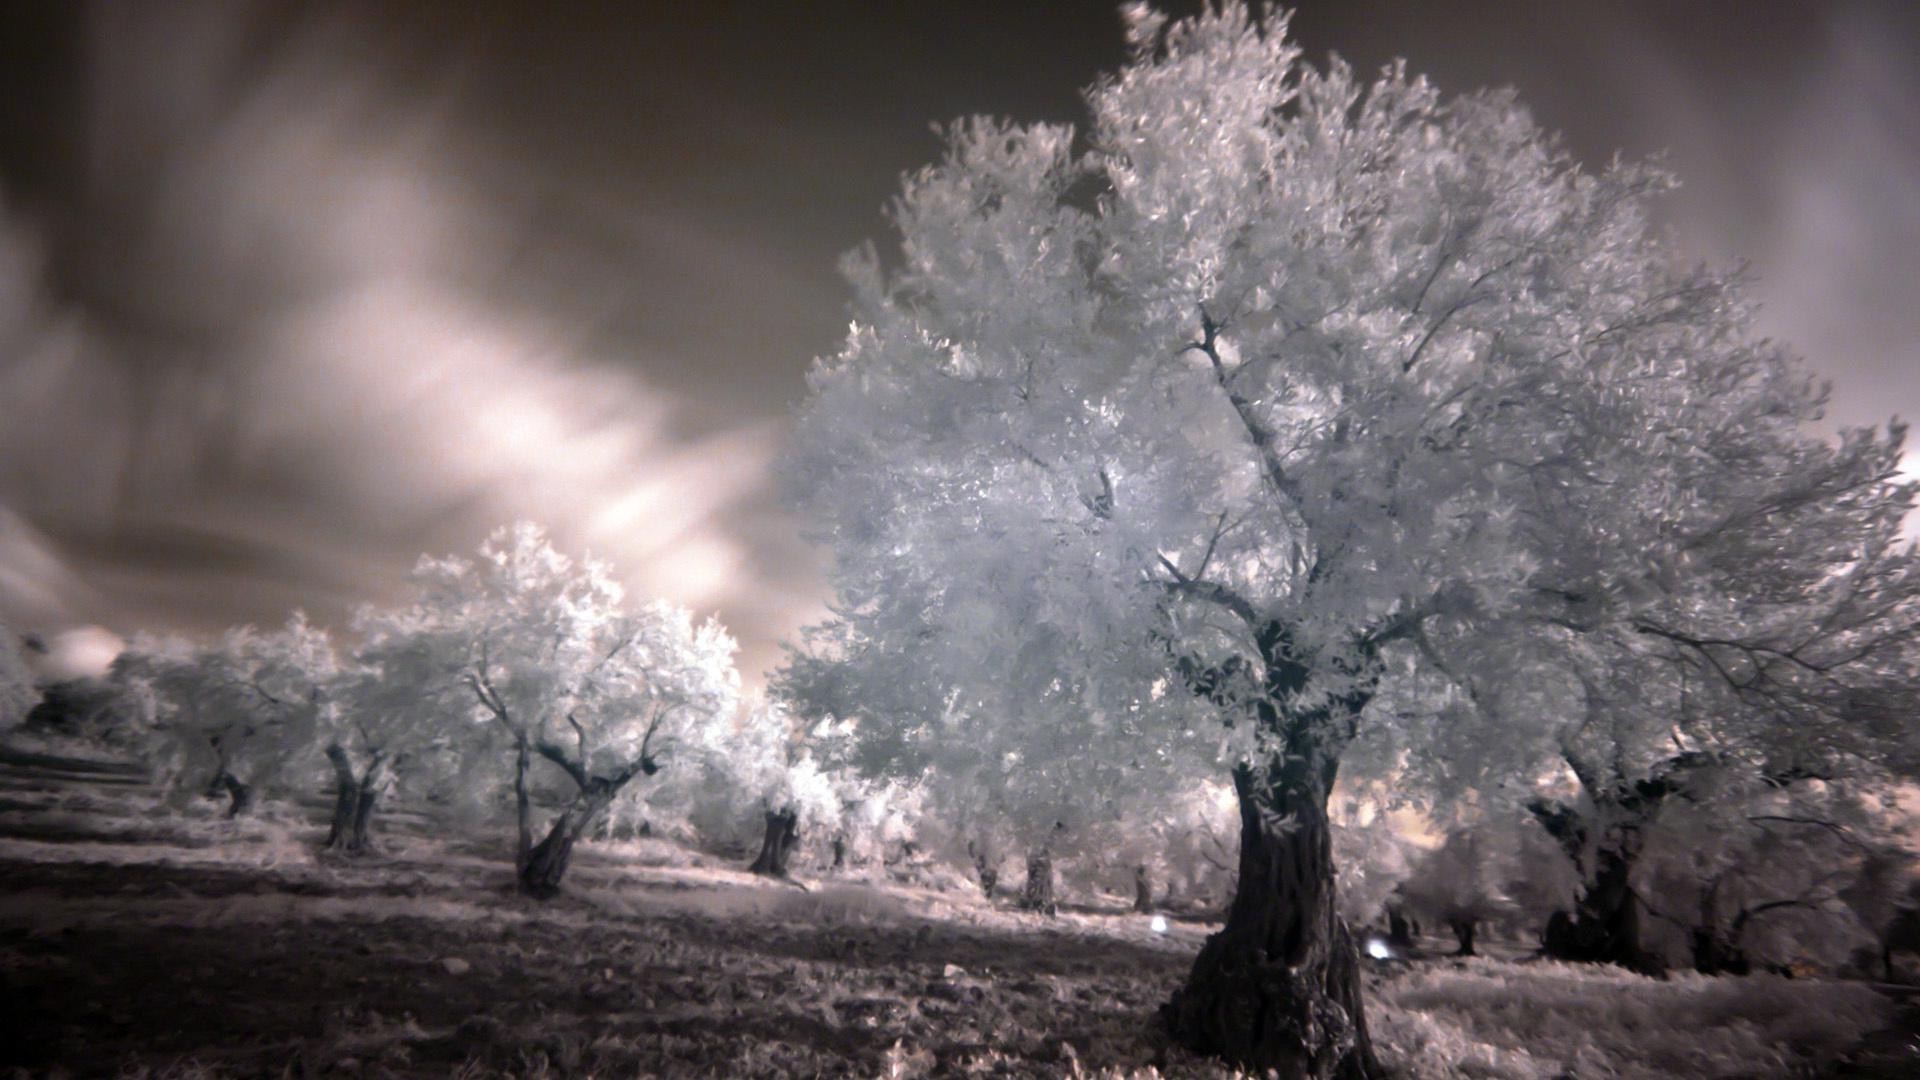 landscapes tree landscape snow winter weather fog wood nature infrared frost cold mist outdoors